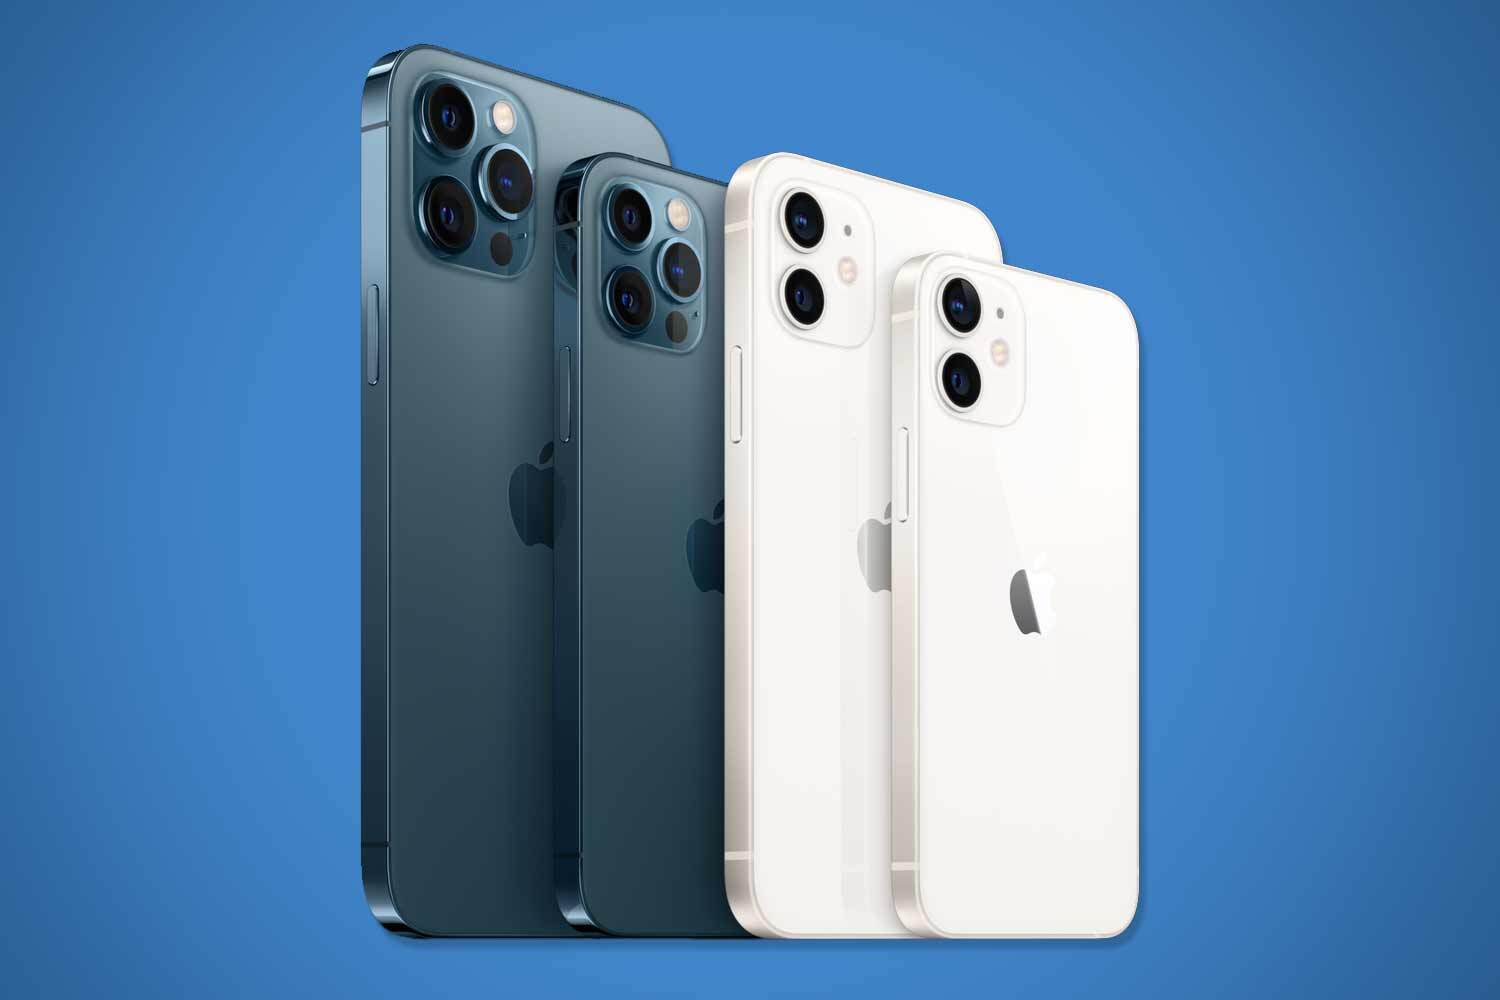 The iPhone 12 series - Demand for 5G iPhone 12/Pro higher than expected; could best iPhone 11 series